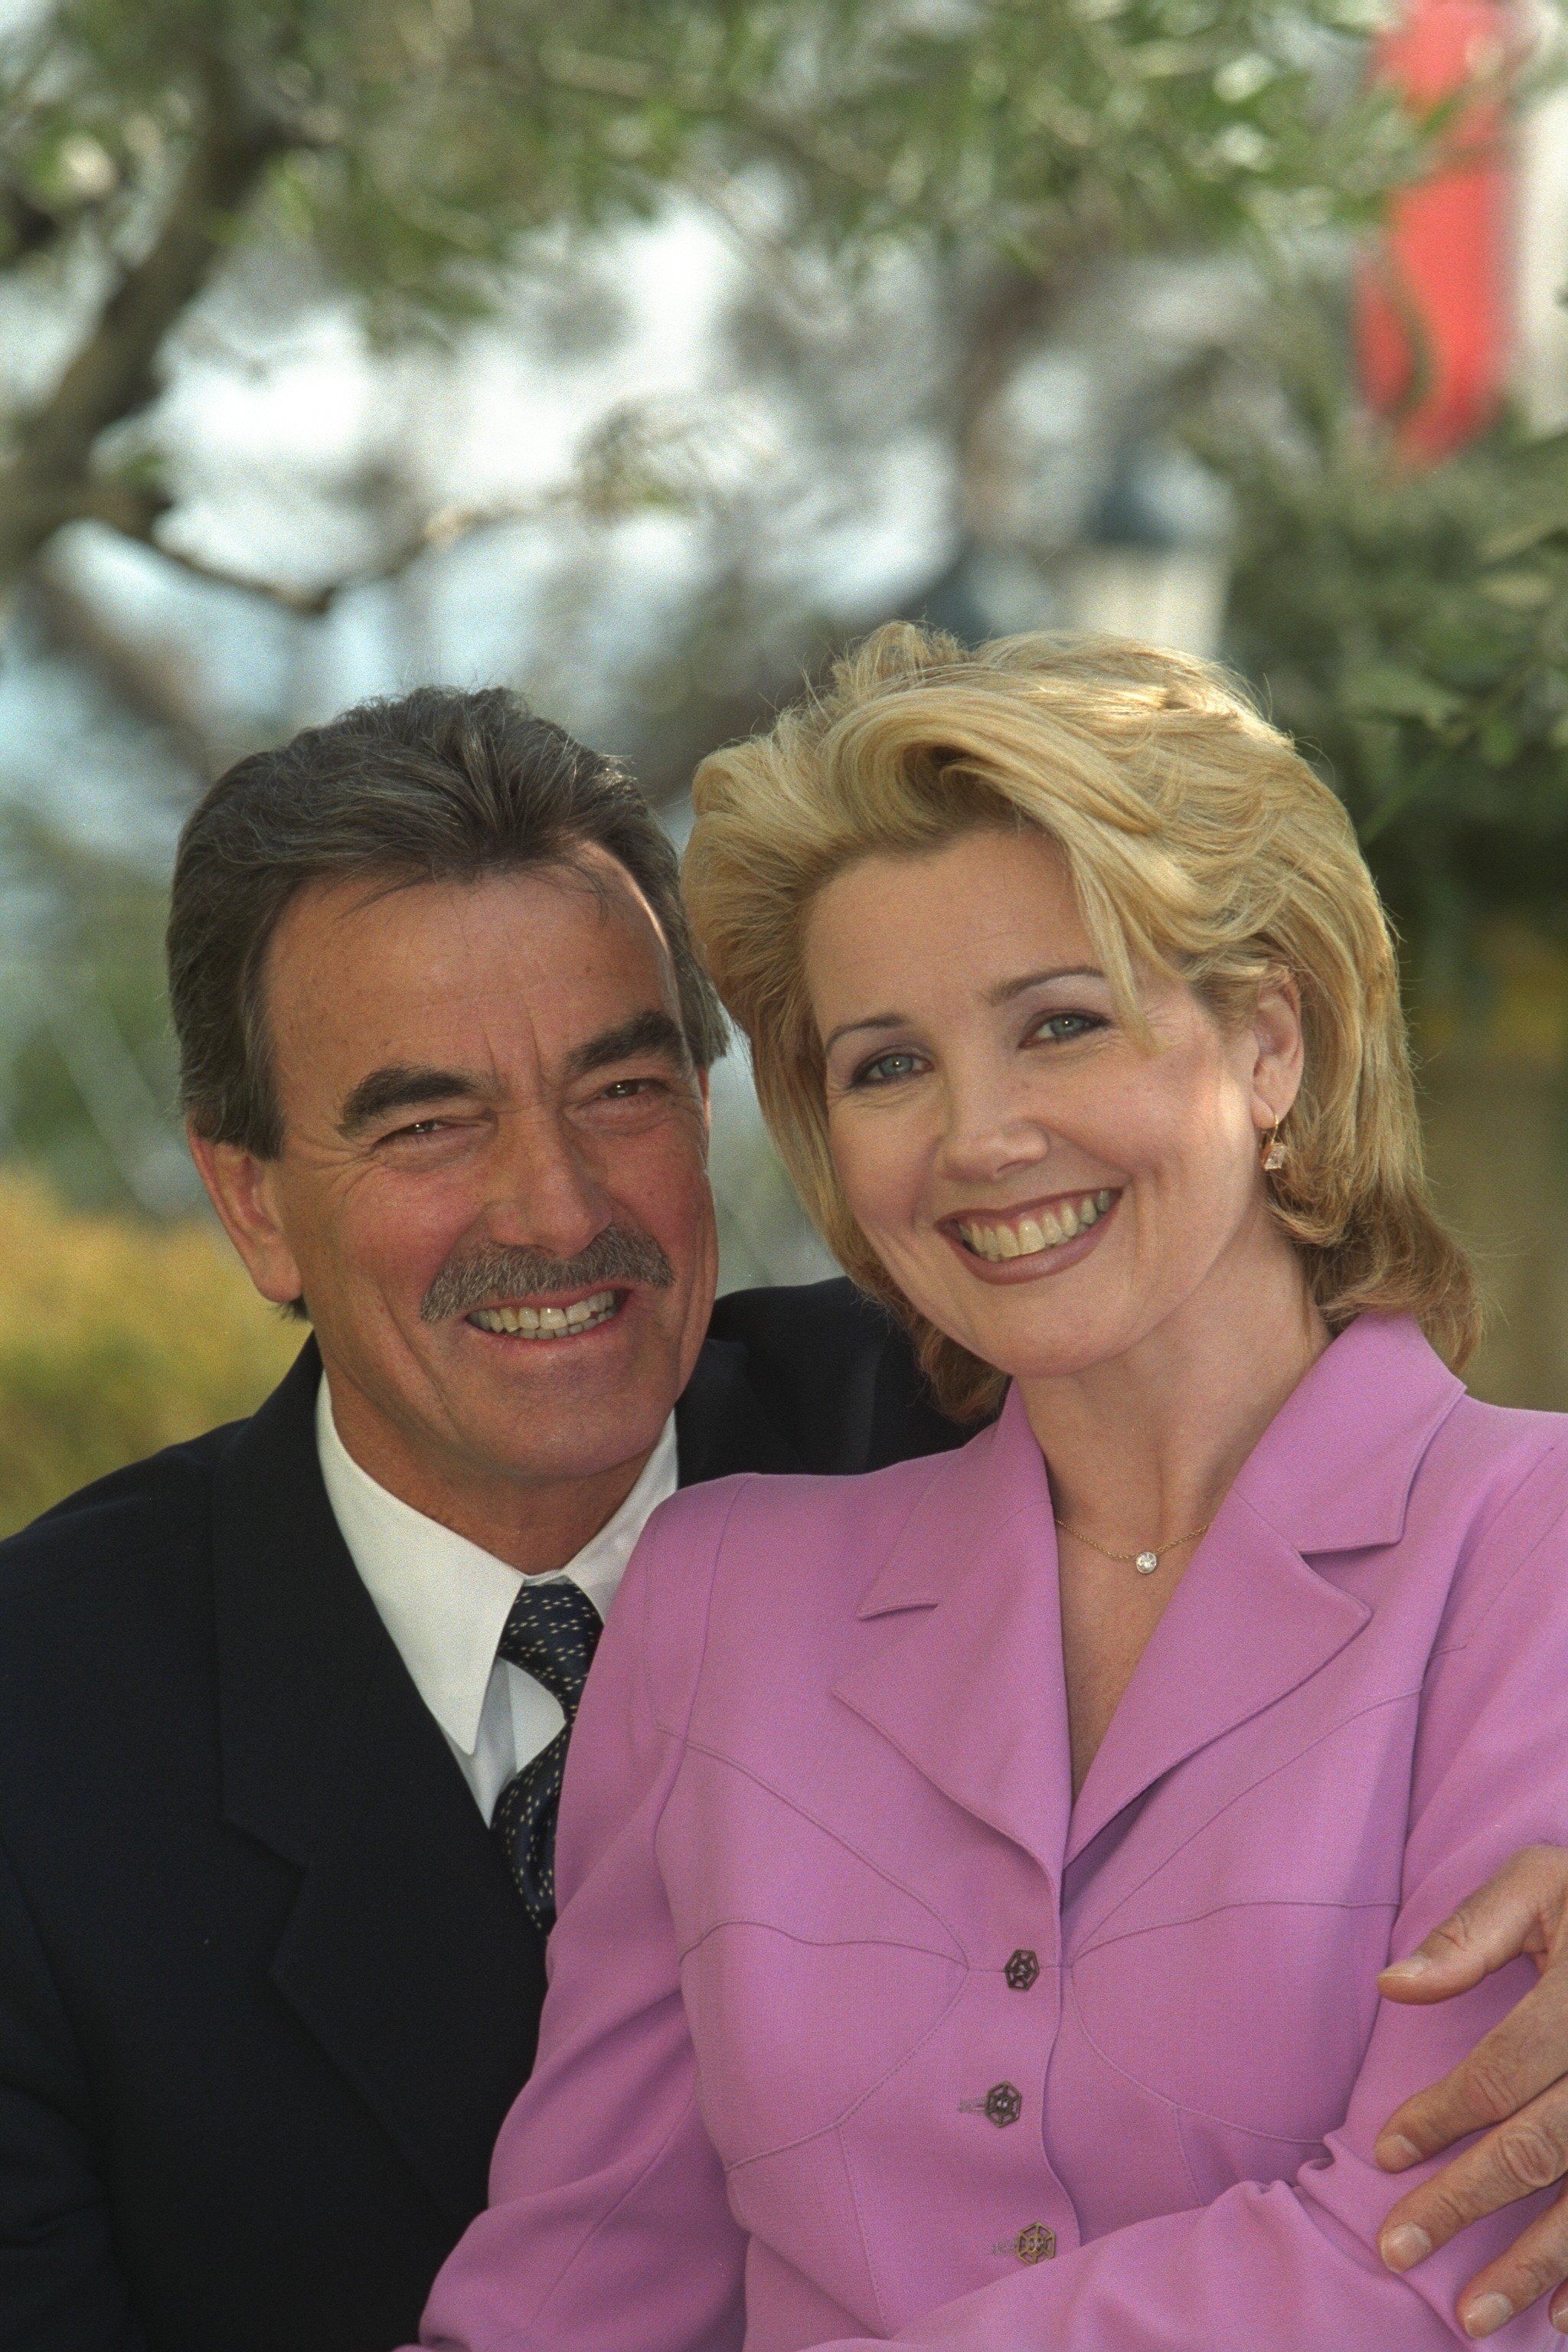 Eric Braeden and Melody Scott Thomas at the Monaco TV Festival on February 19, 1999. | Source: Eric Robert/Sygma/Getty Images